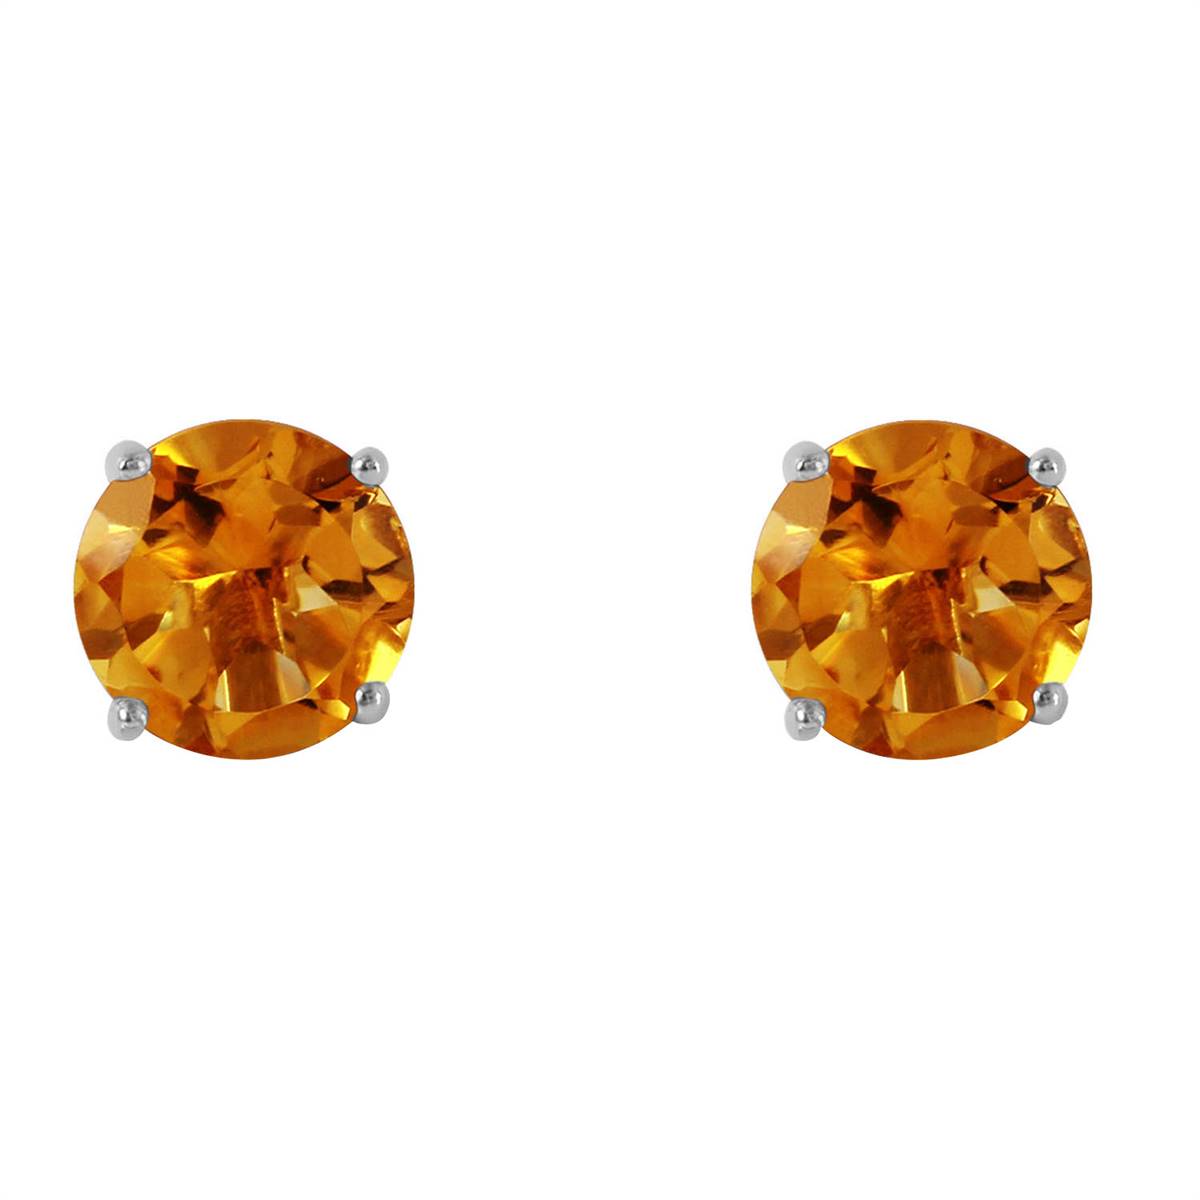 3.1 Carat 14K Solid White Gold Vous Le Charme Citrine Earrings